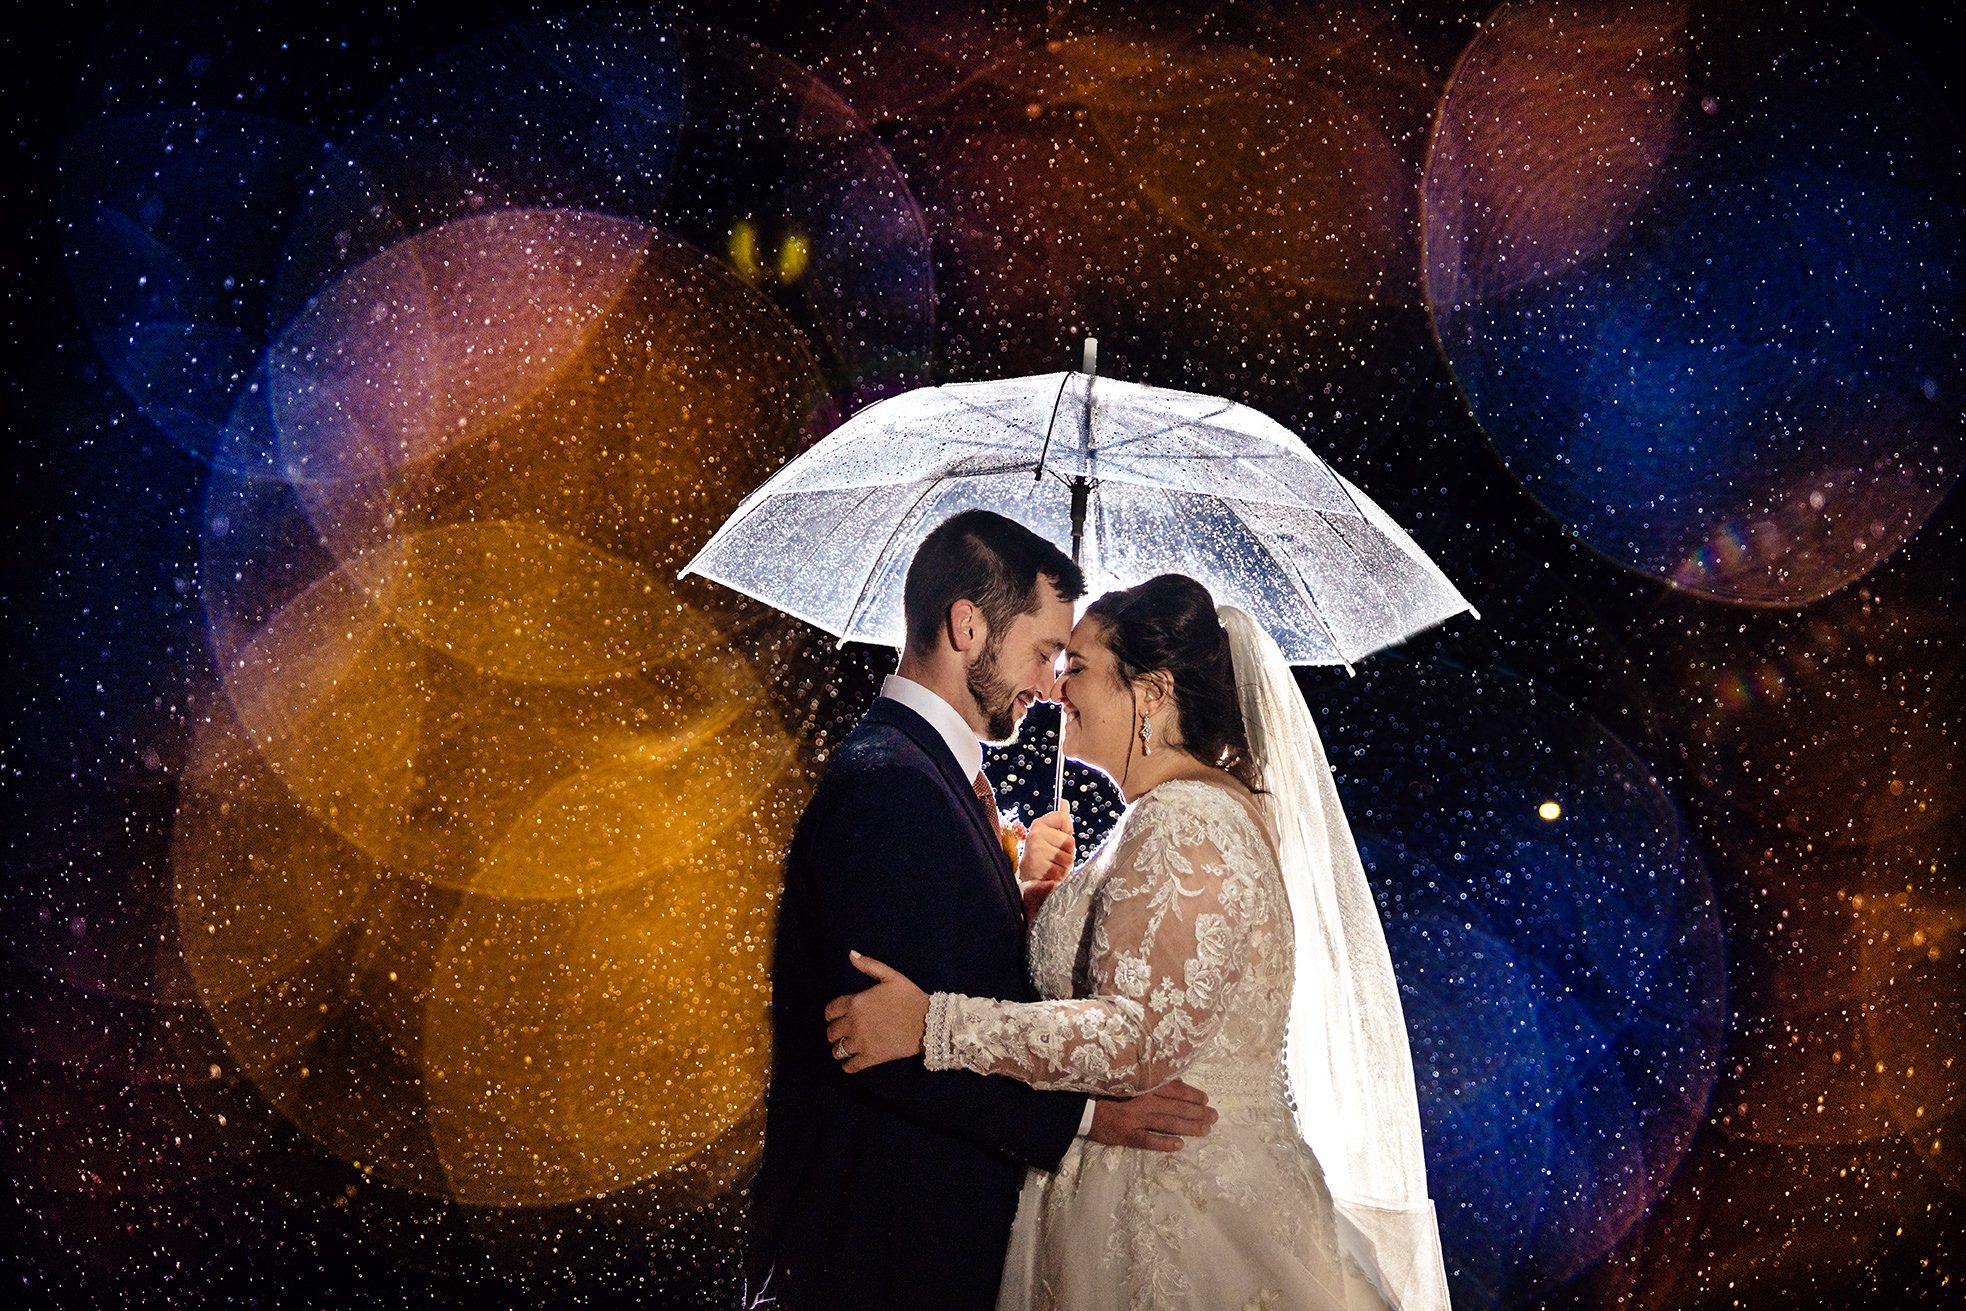 Snowy night photo for bride and groom